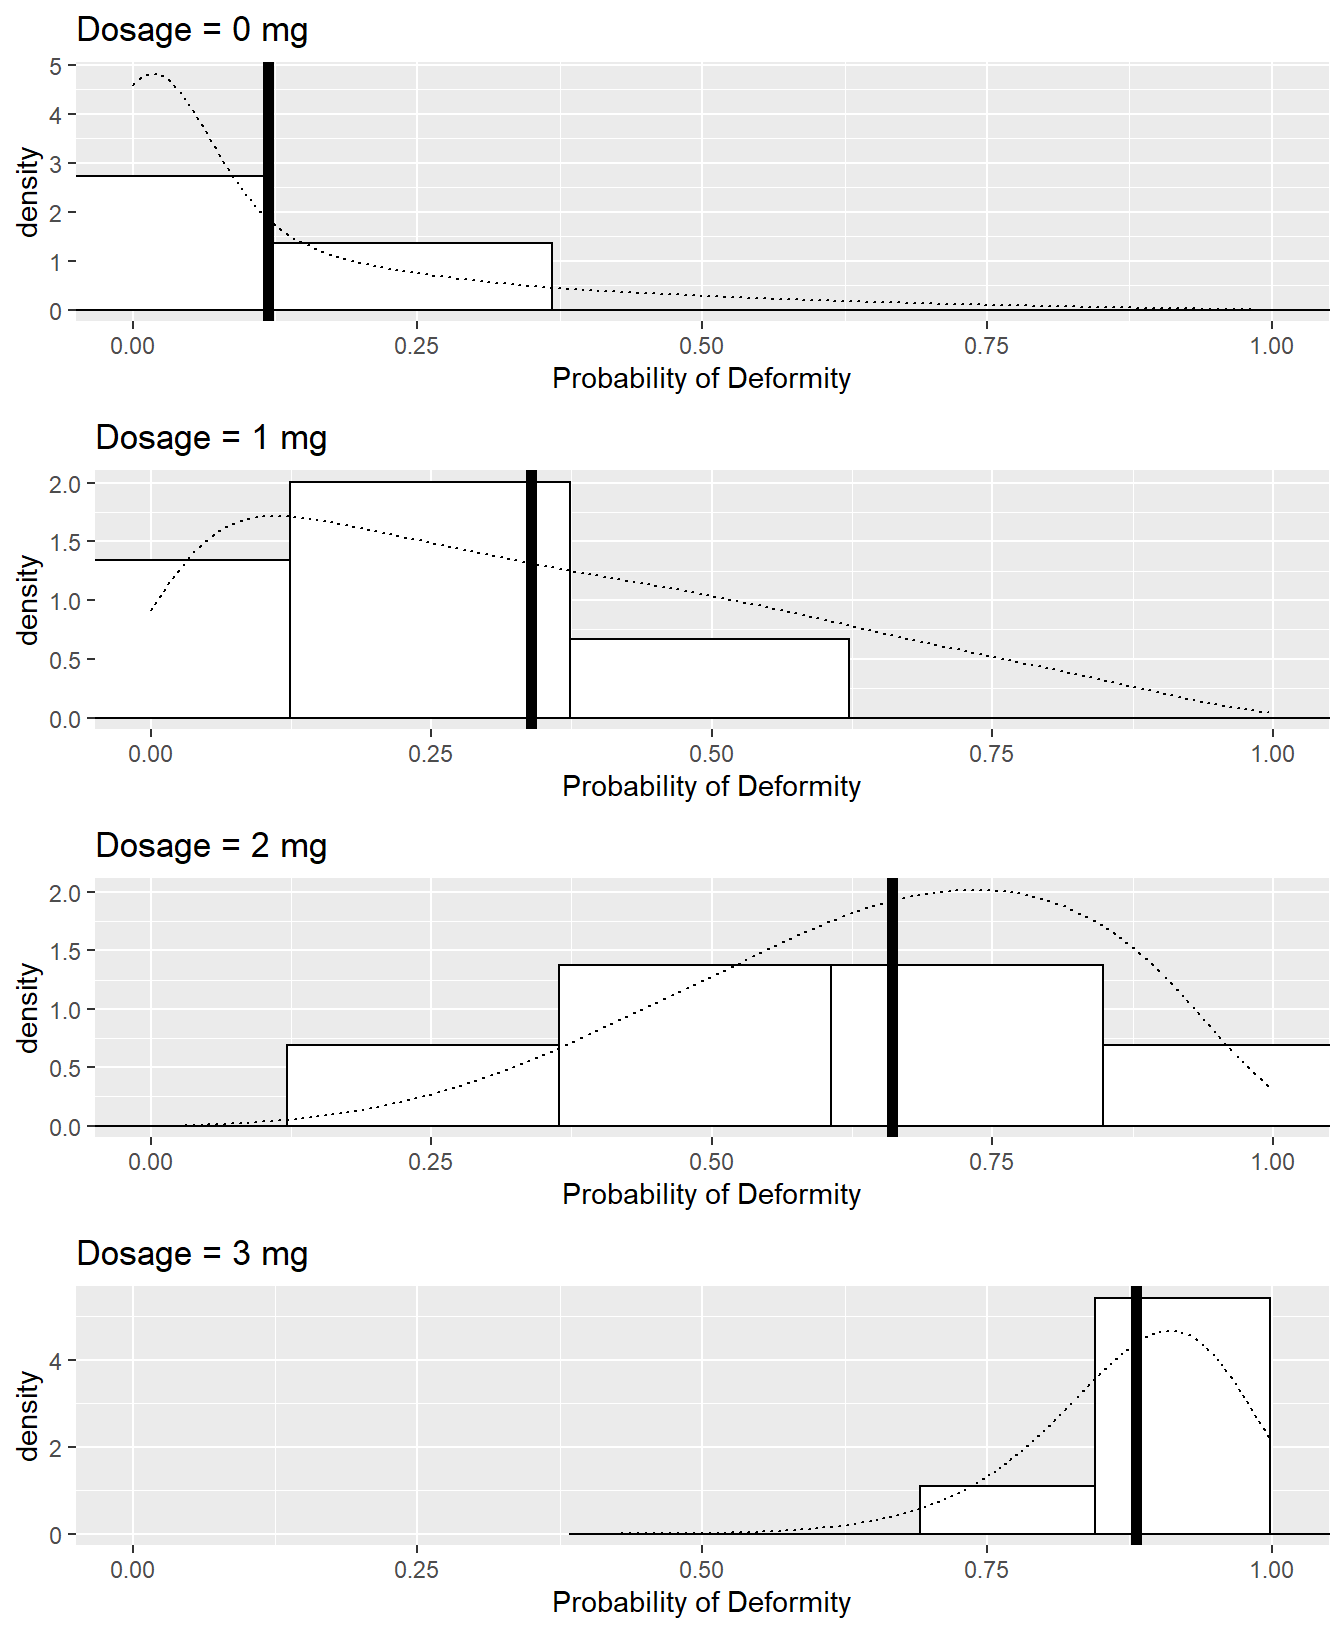 Observed (histograms) and theoretical (density curves) distributions of dams' probabilities of producing deformed pups by dose group in Scenario 2b.  The thick vertical lines represent the fixed probabilities of a deformed pup by dose group in Scenario 2a.